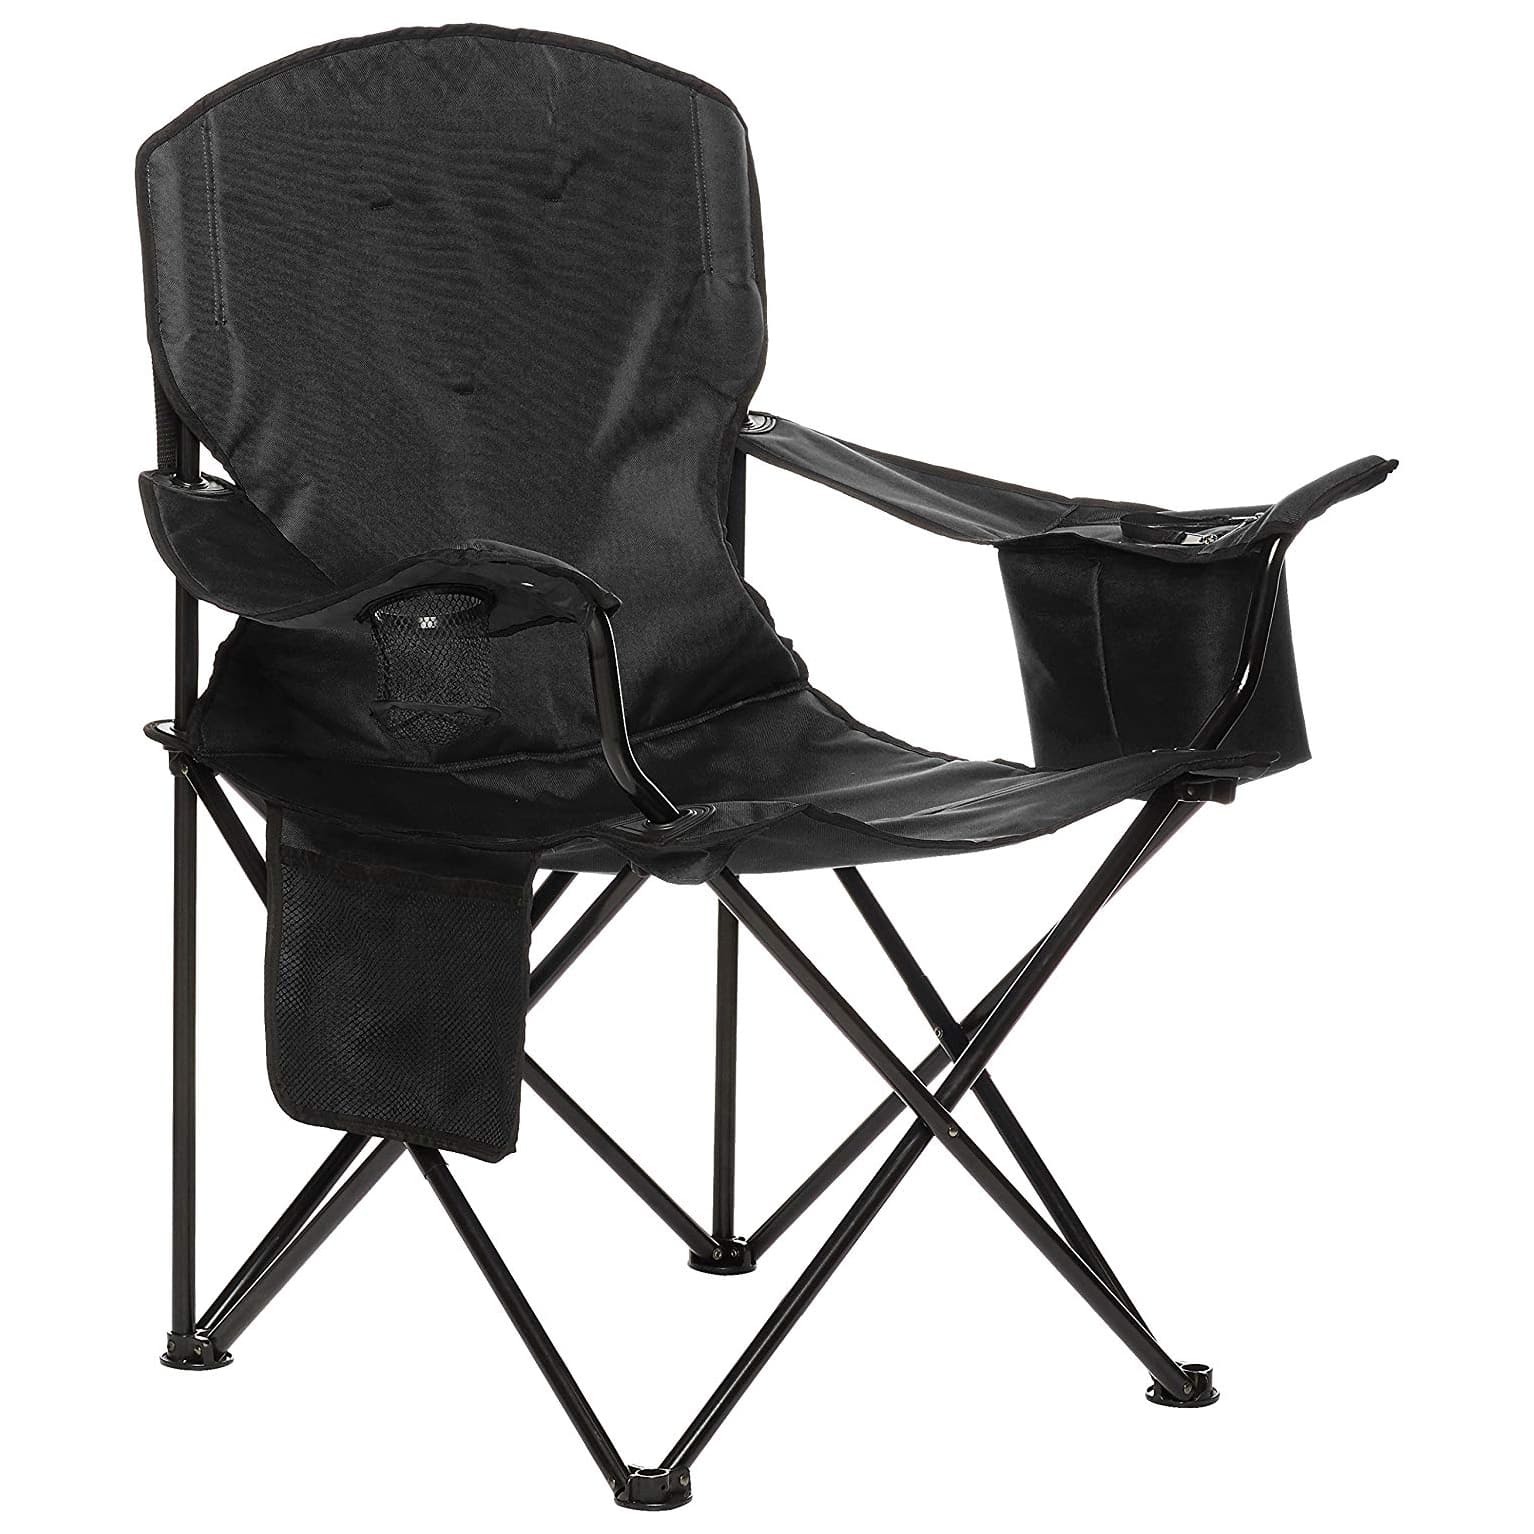 Top 10 Best Lightweight Camping Chairs in 2023 Reviews | Guide